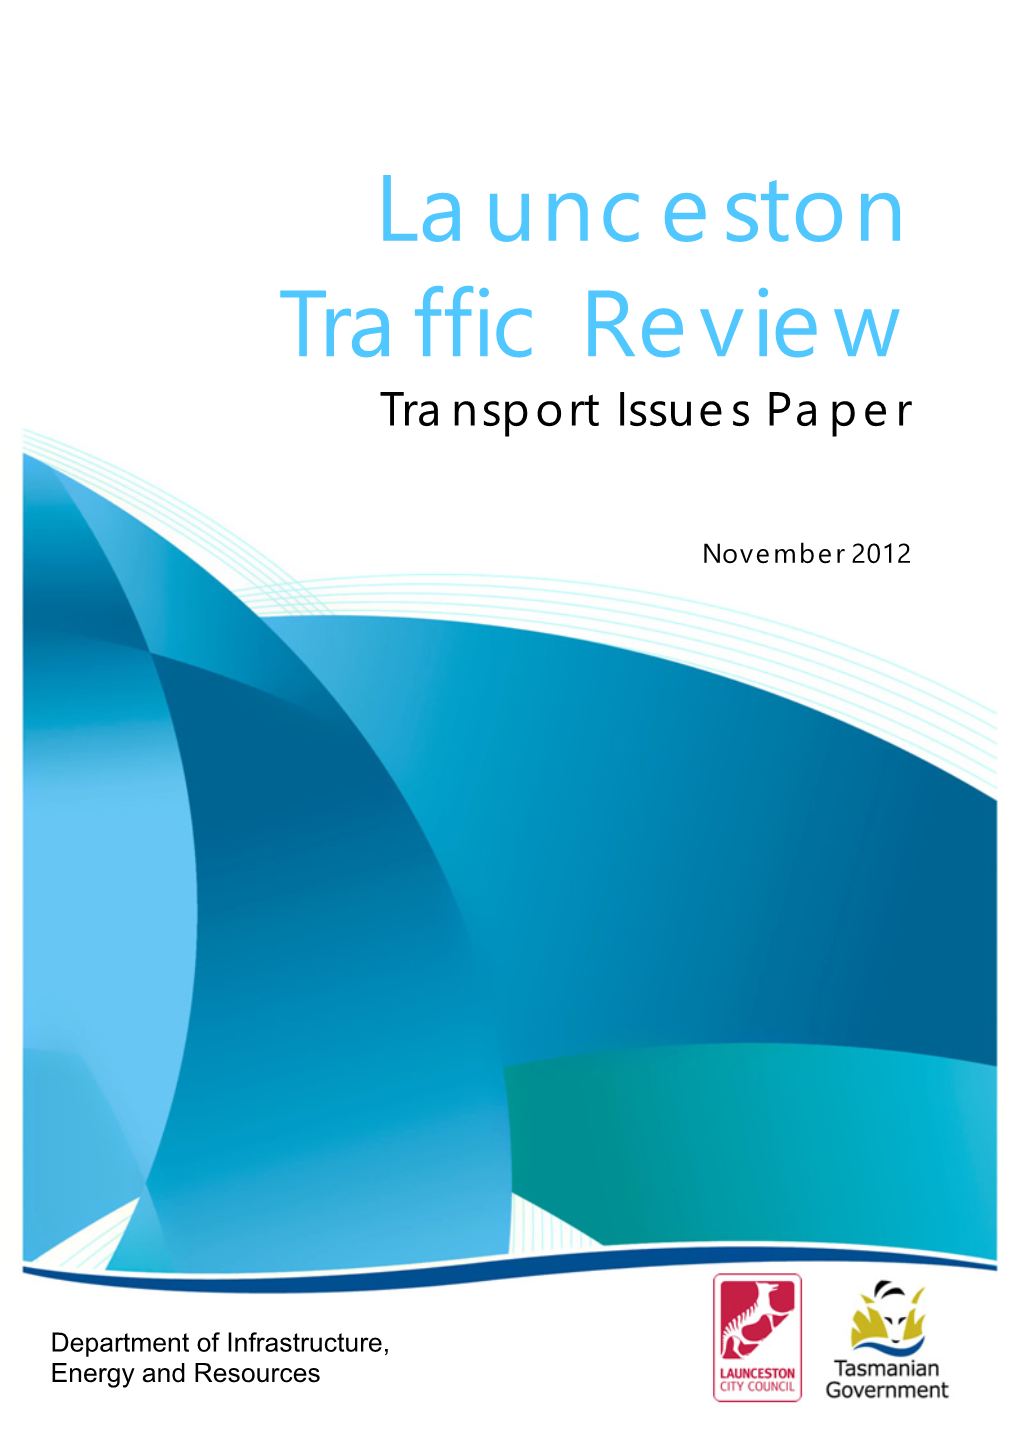 Launceston Traffic Review Transport Issues Paper